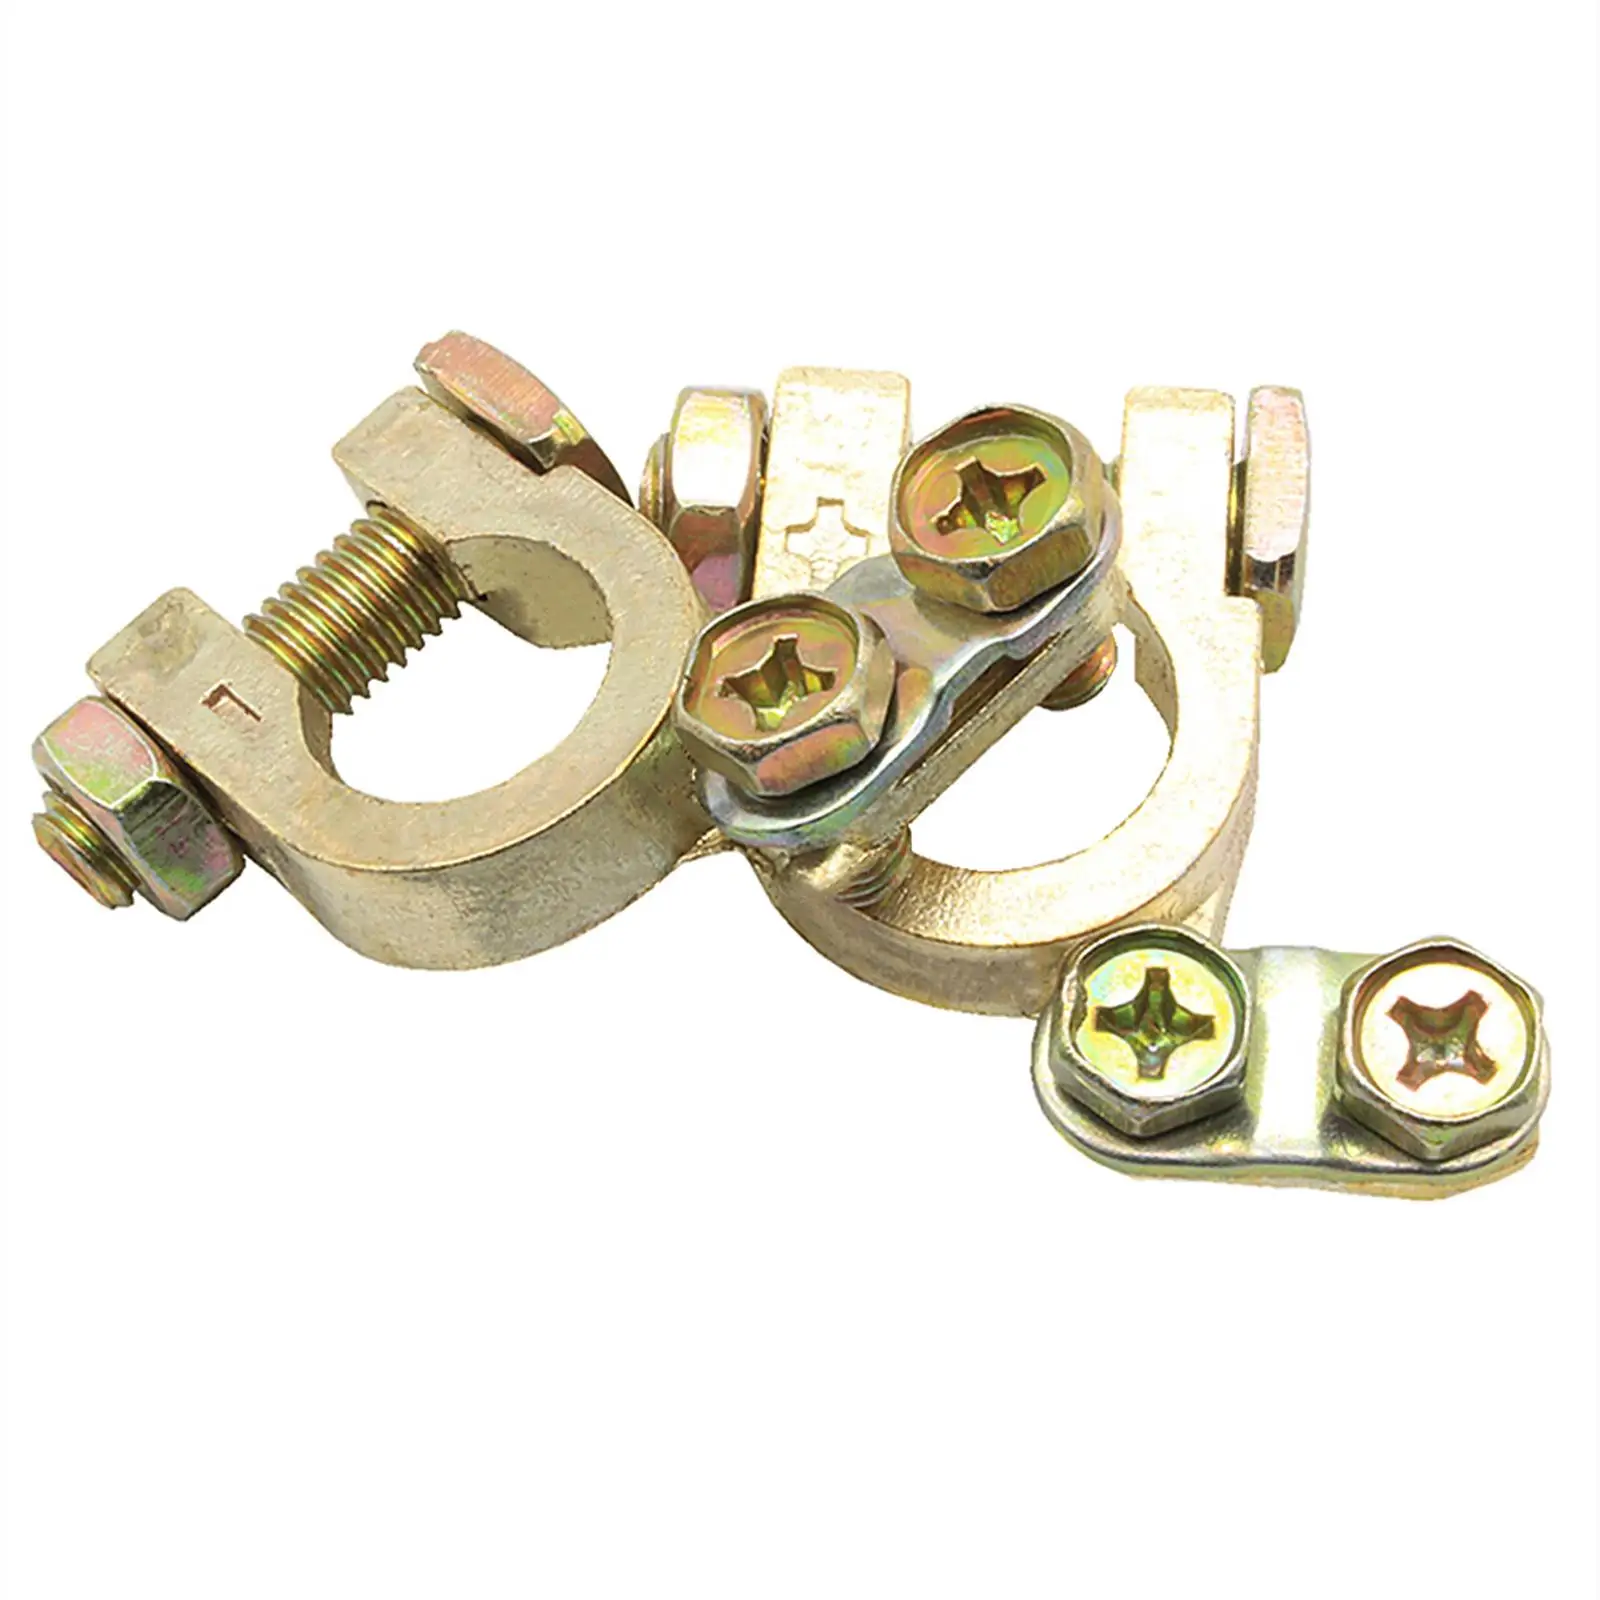 2Pcs Brass Battery Terminals Connector Clamps Cars Boat Accessories Terminal